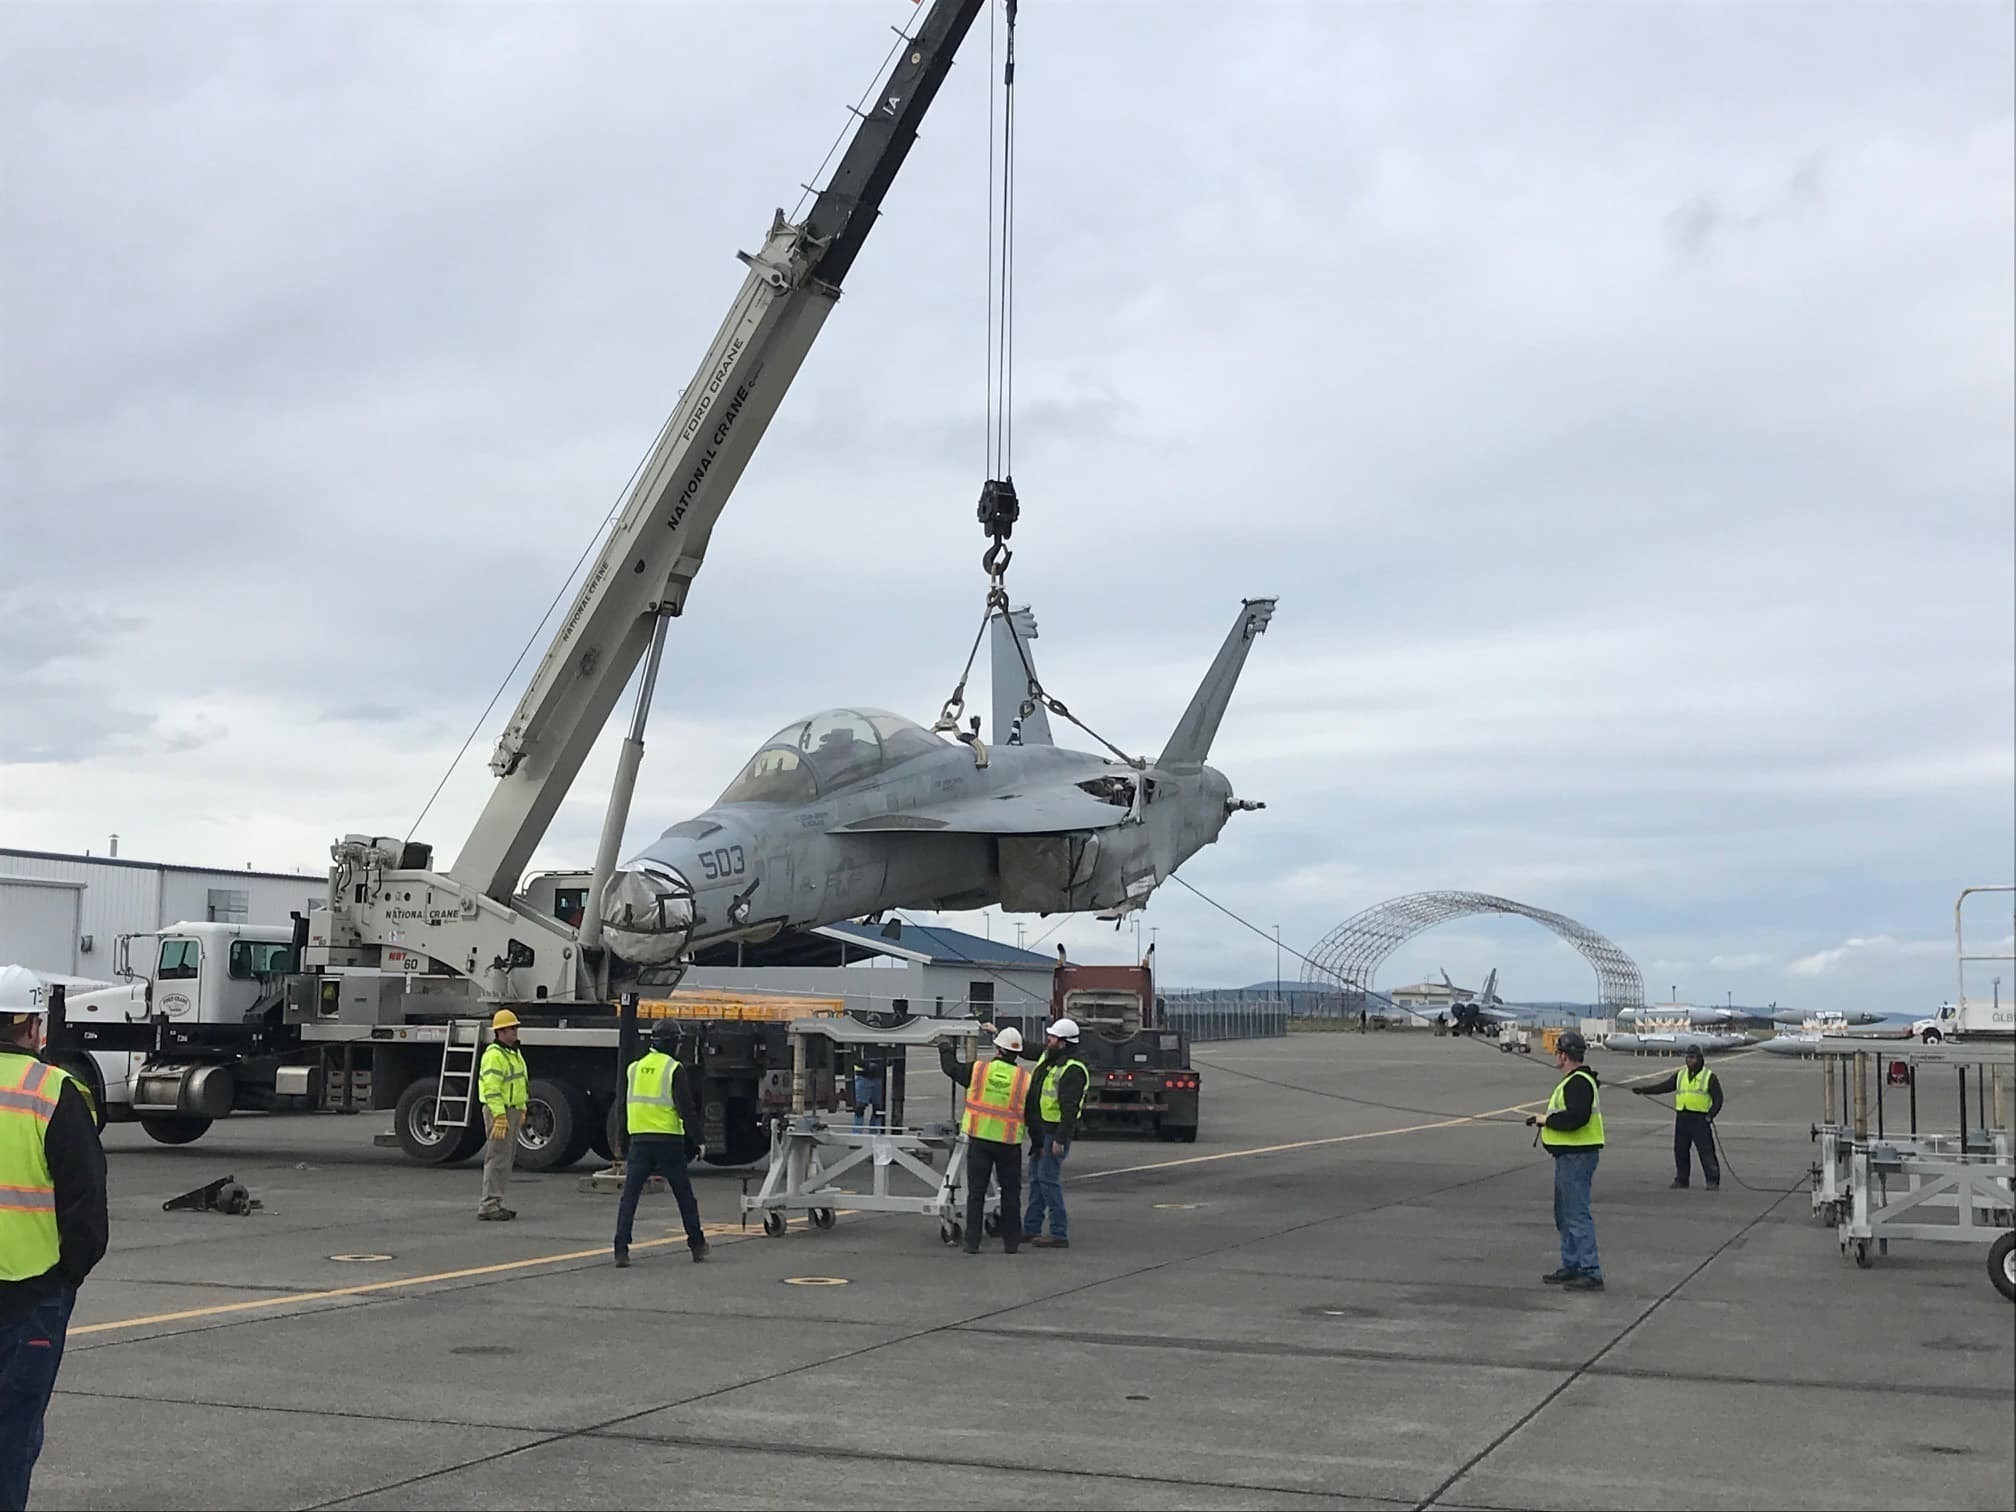 Growler aircraft overhaul at Naval Air Station (NAS) Whidbey Island